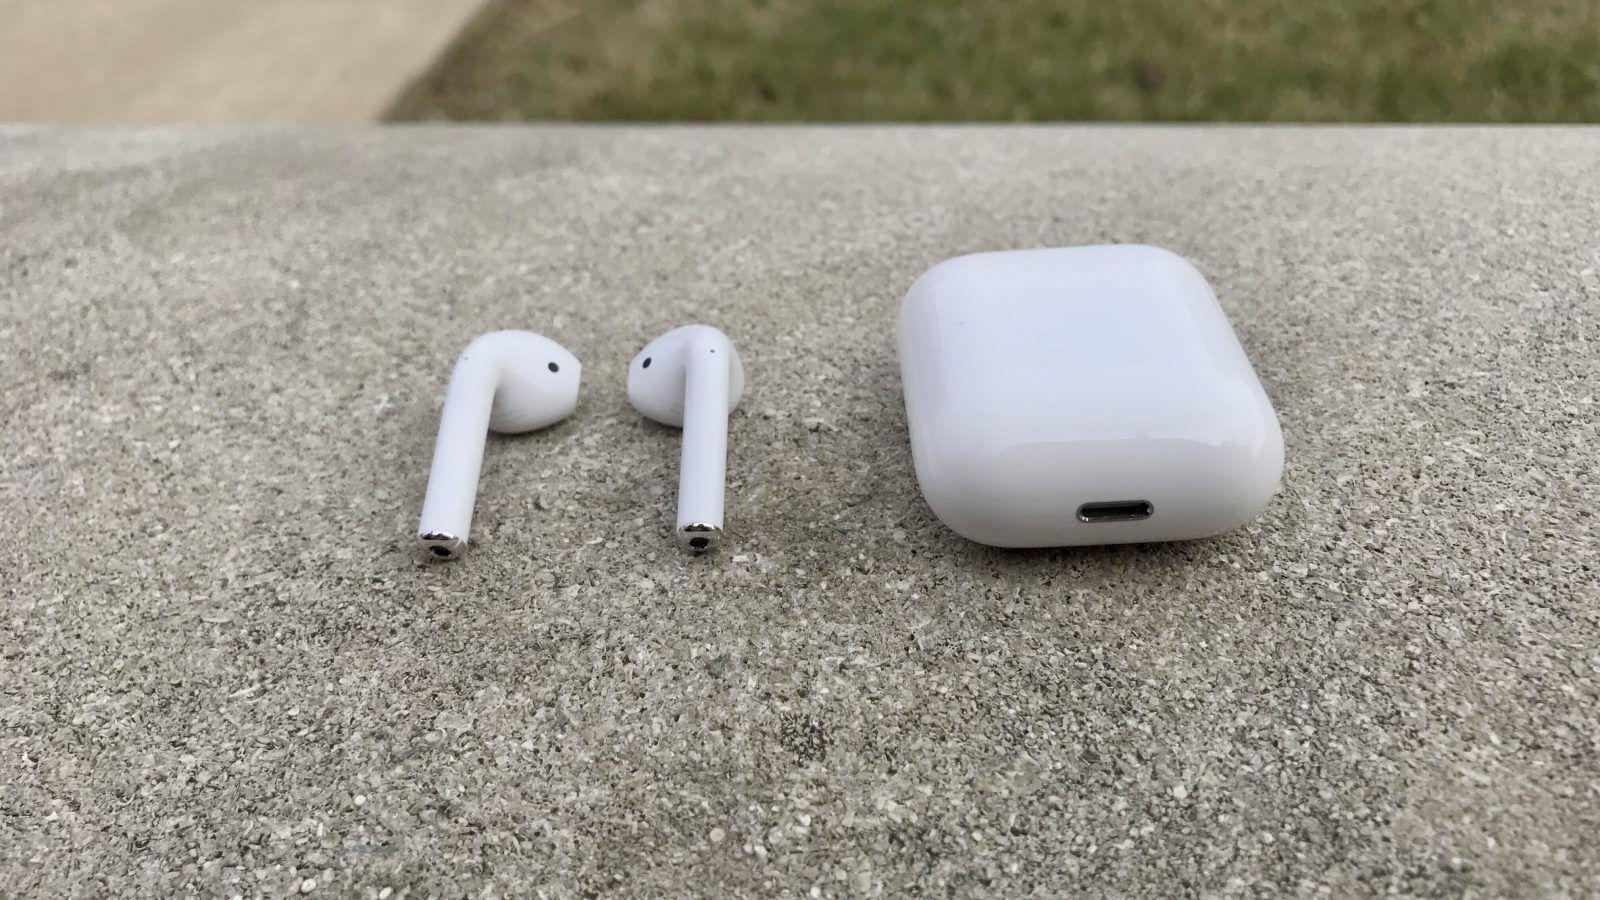 Apple patent application hints at waterproof AirPods case capable